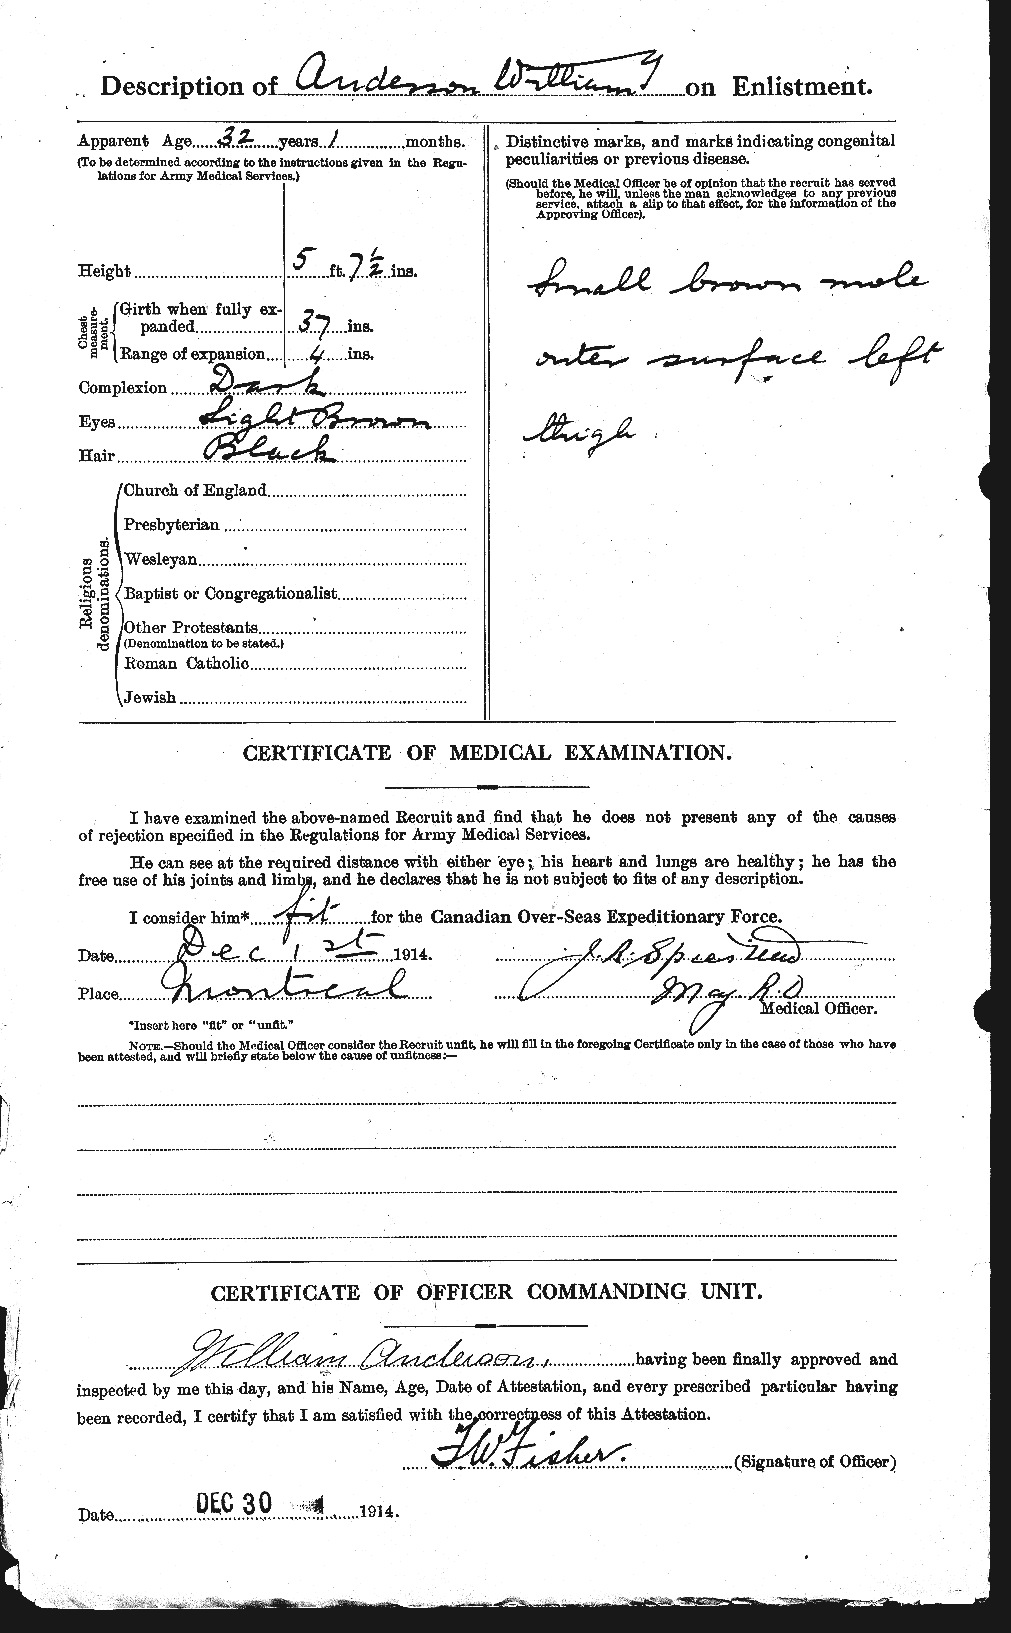 Personnel Records of the First World War - CEF 210849b